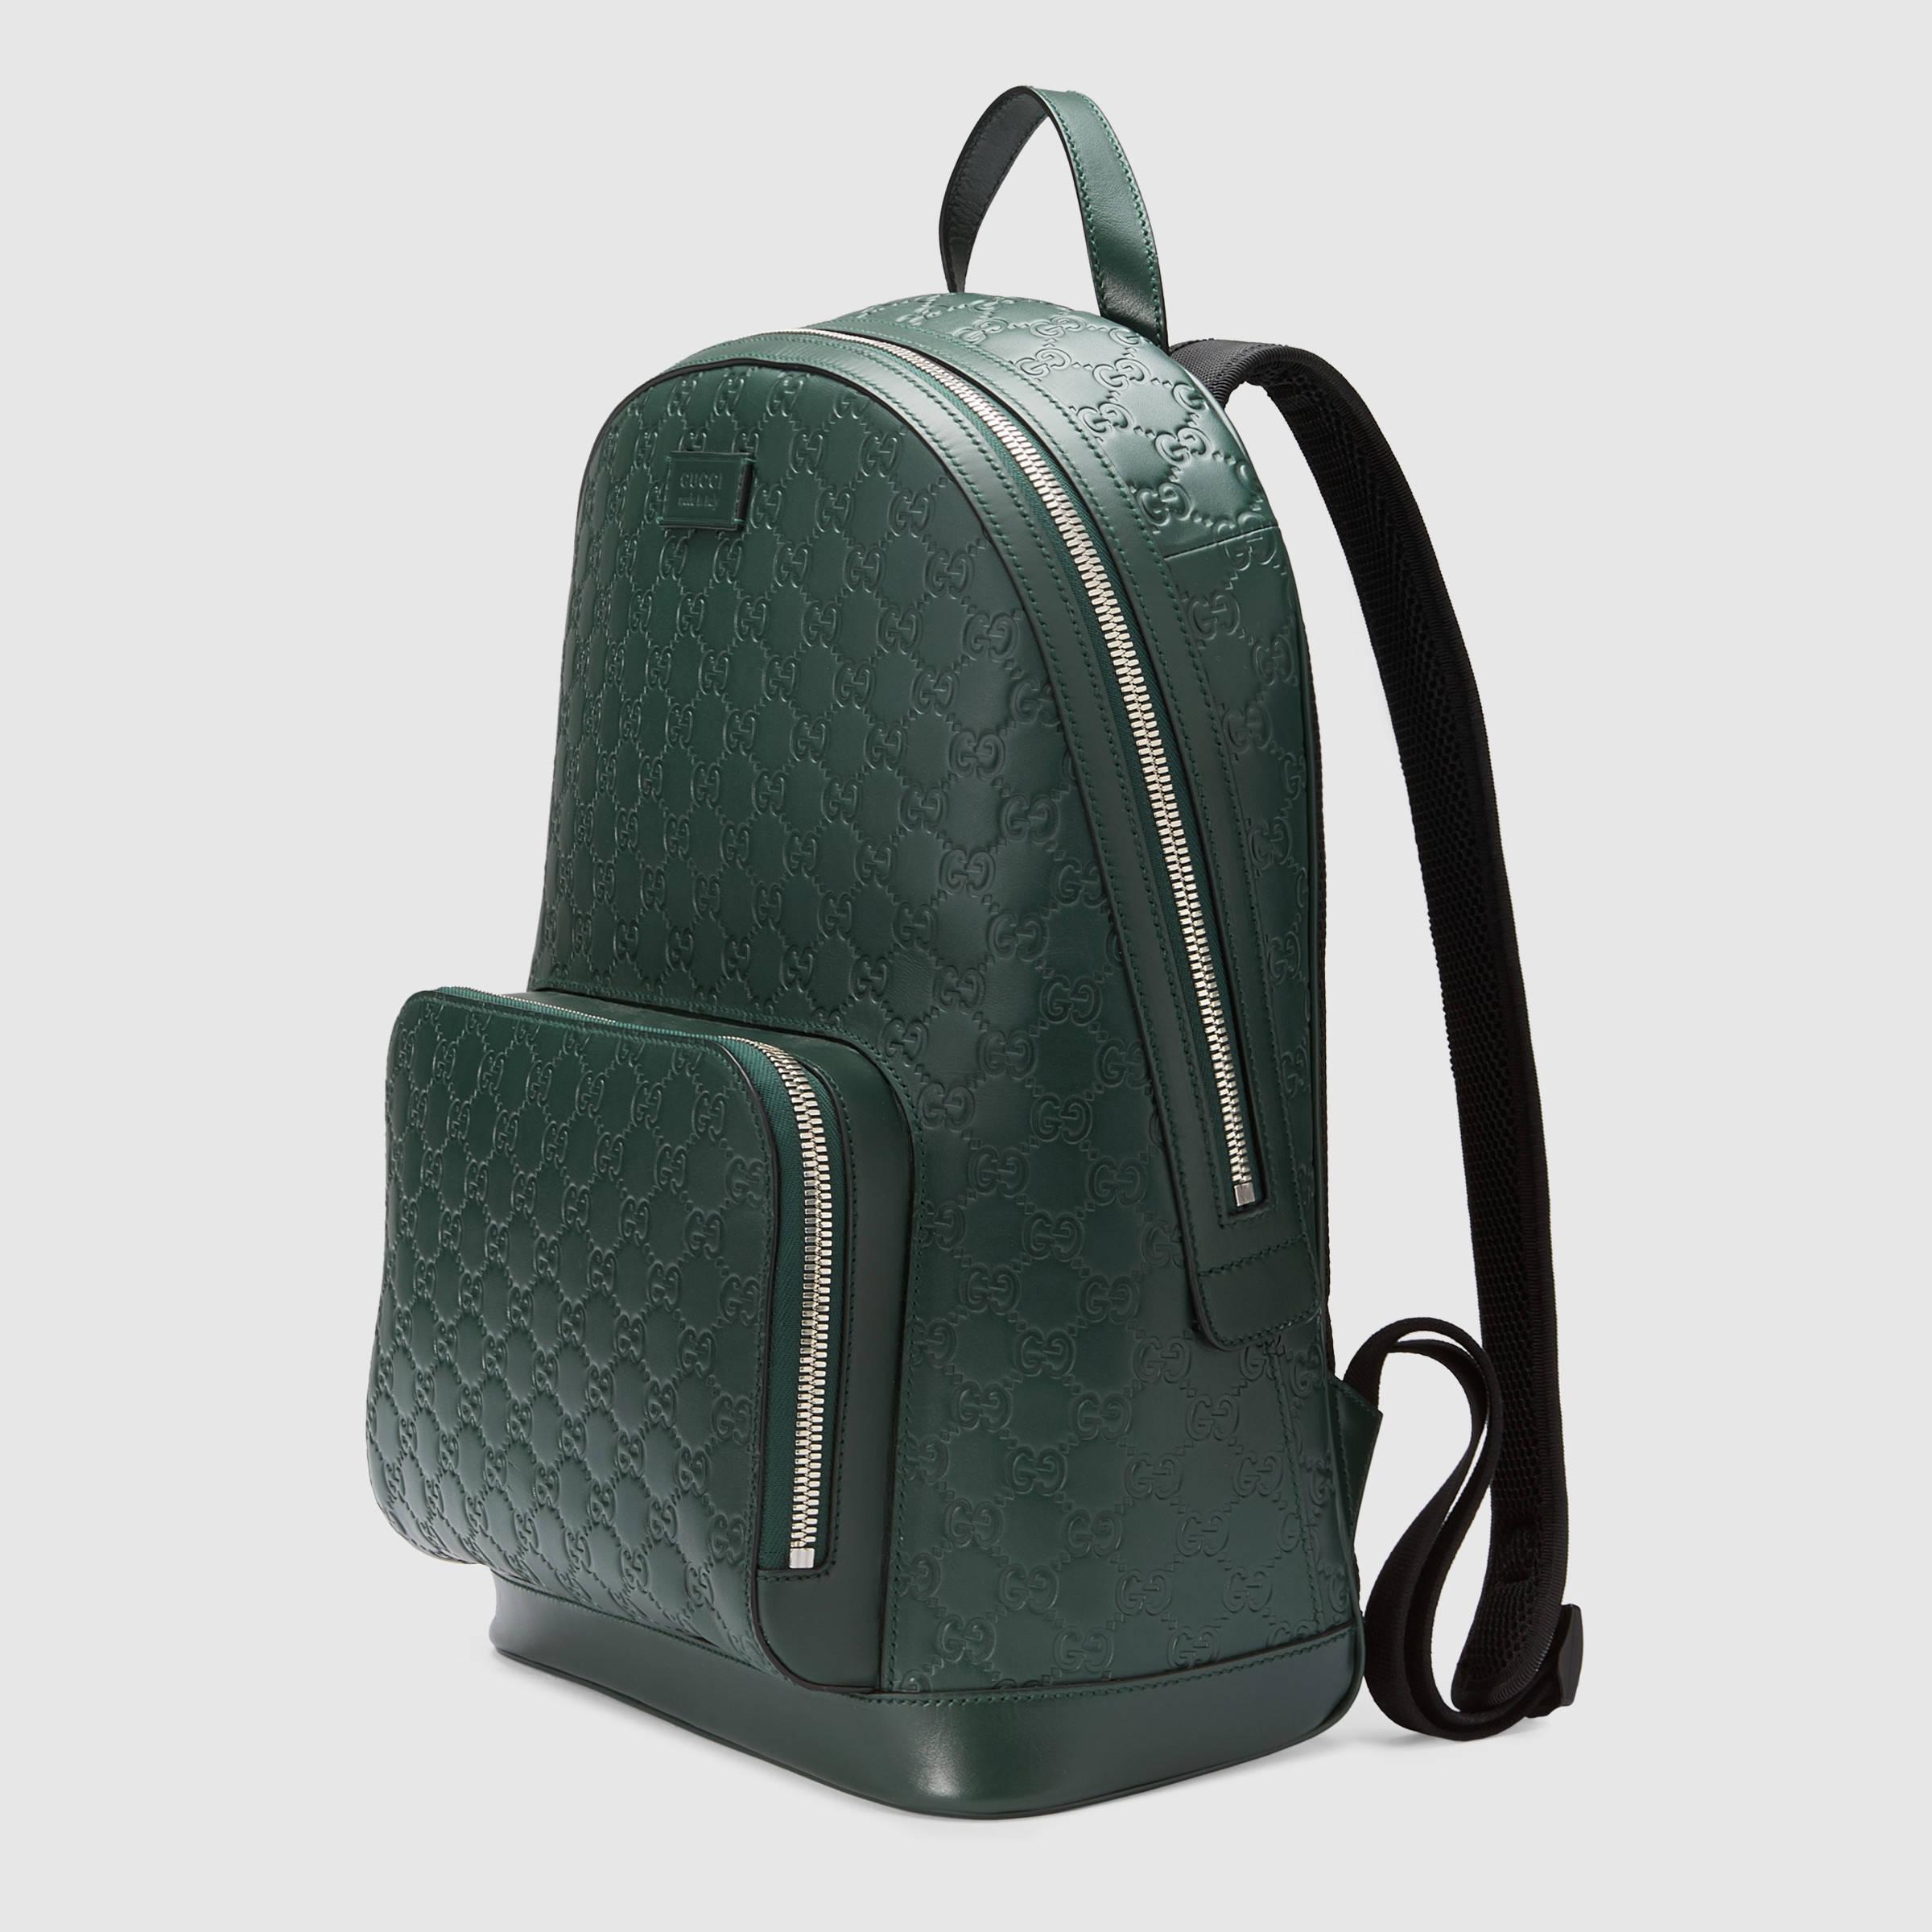 Lyst - Gucci Signature Leather Backpack in Green